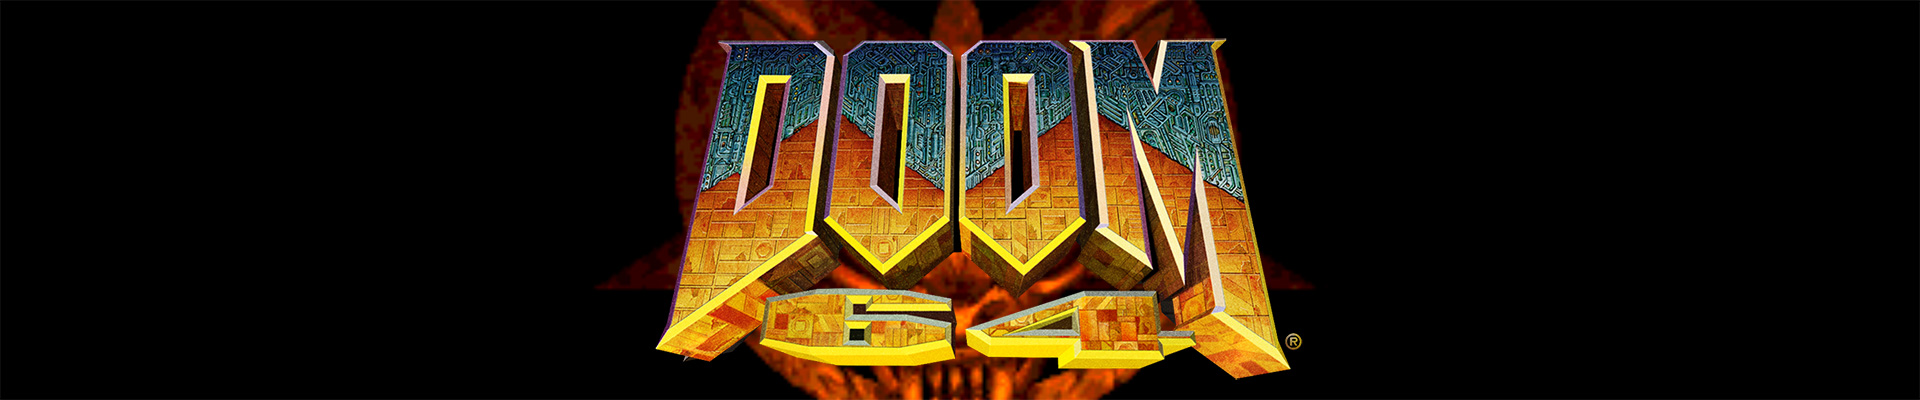 In love with: Doom 64